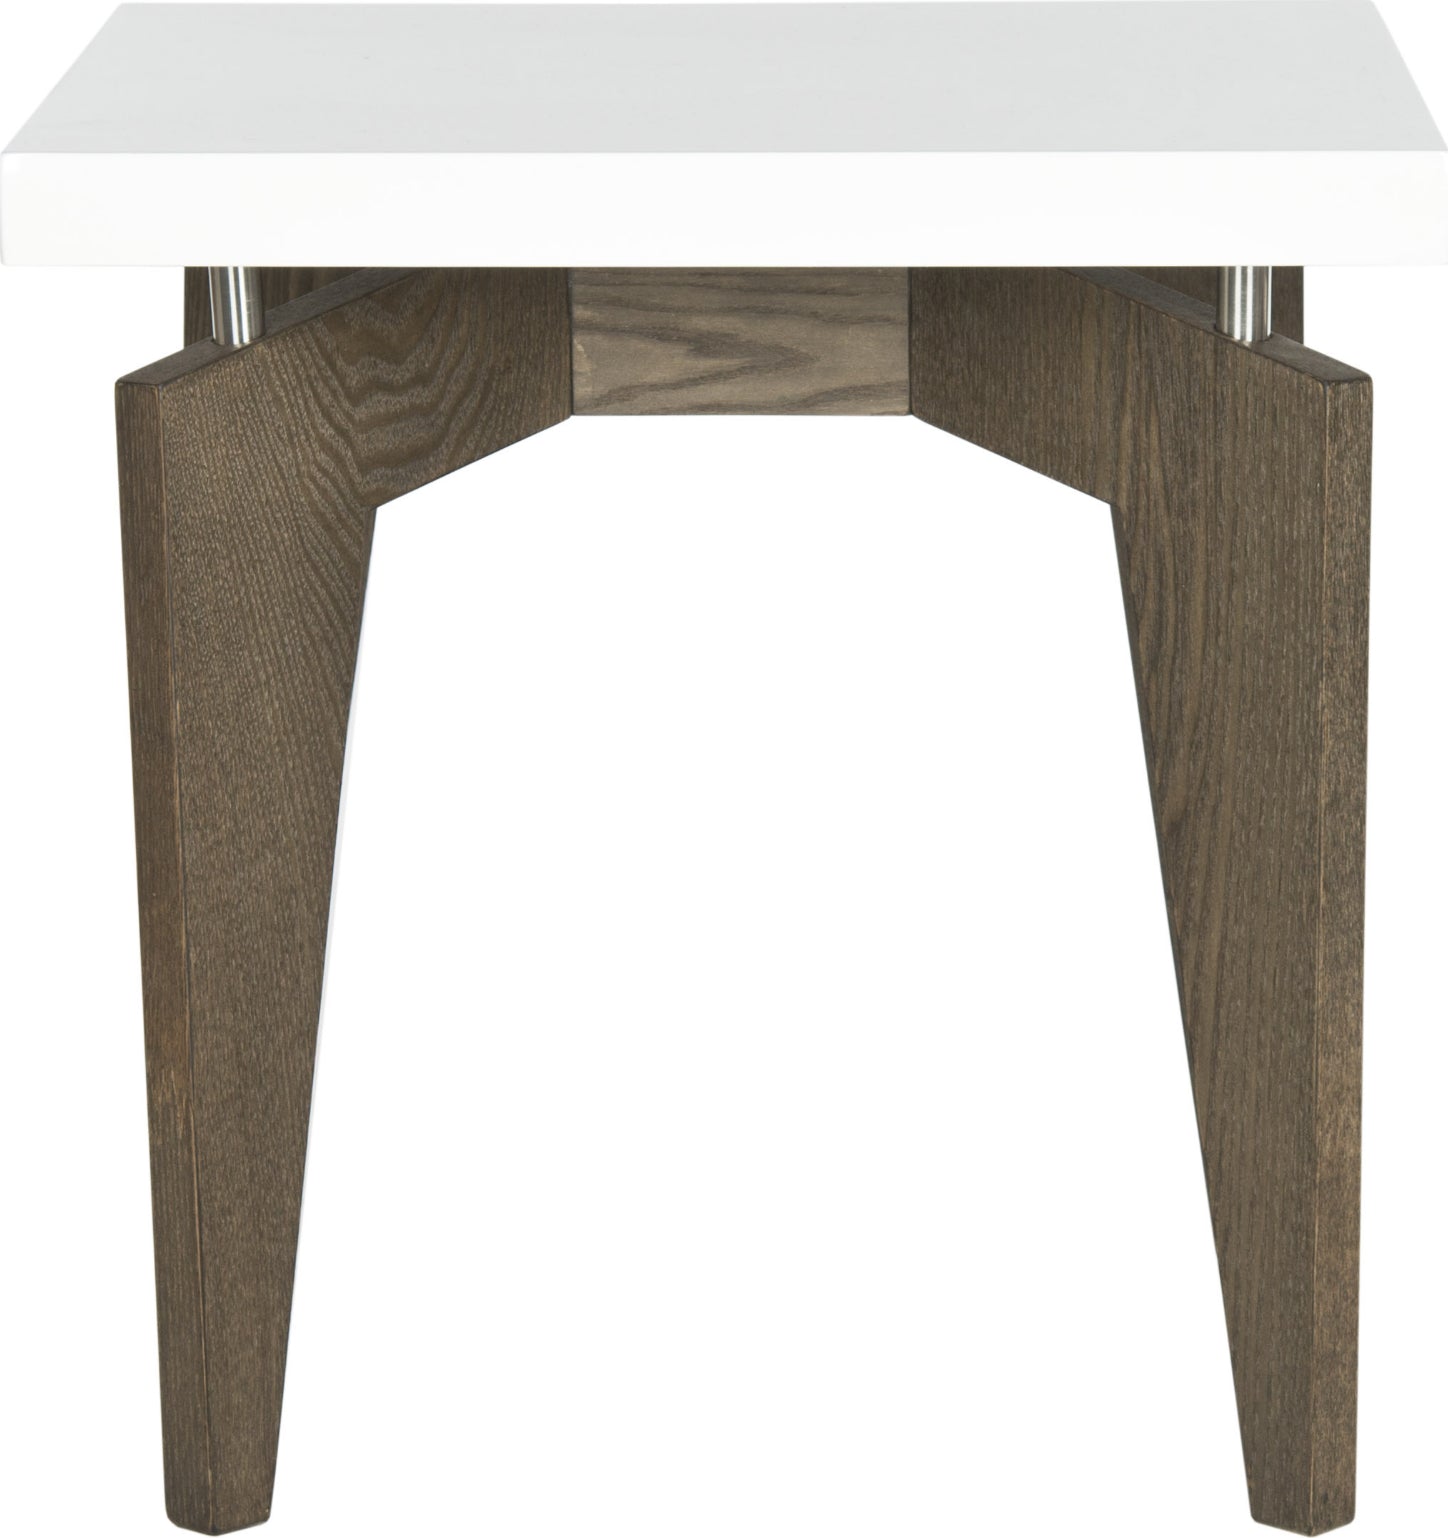 Safavieh Josef Retro Lacquer Floating Top End Table White and Dark Brown Furniture main image